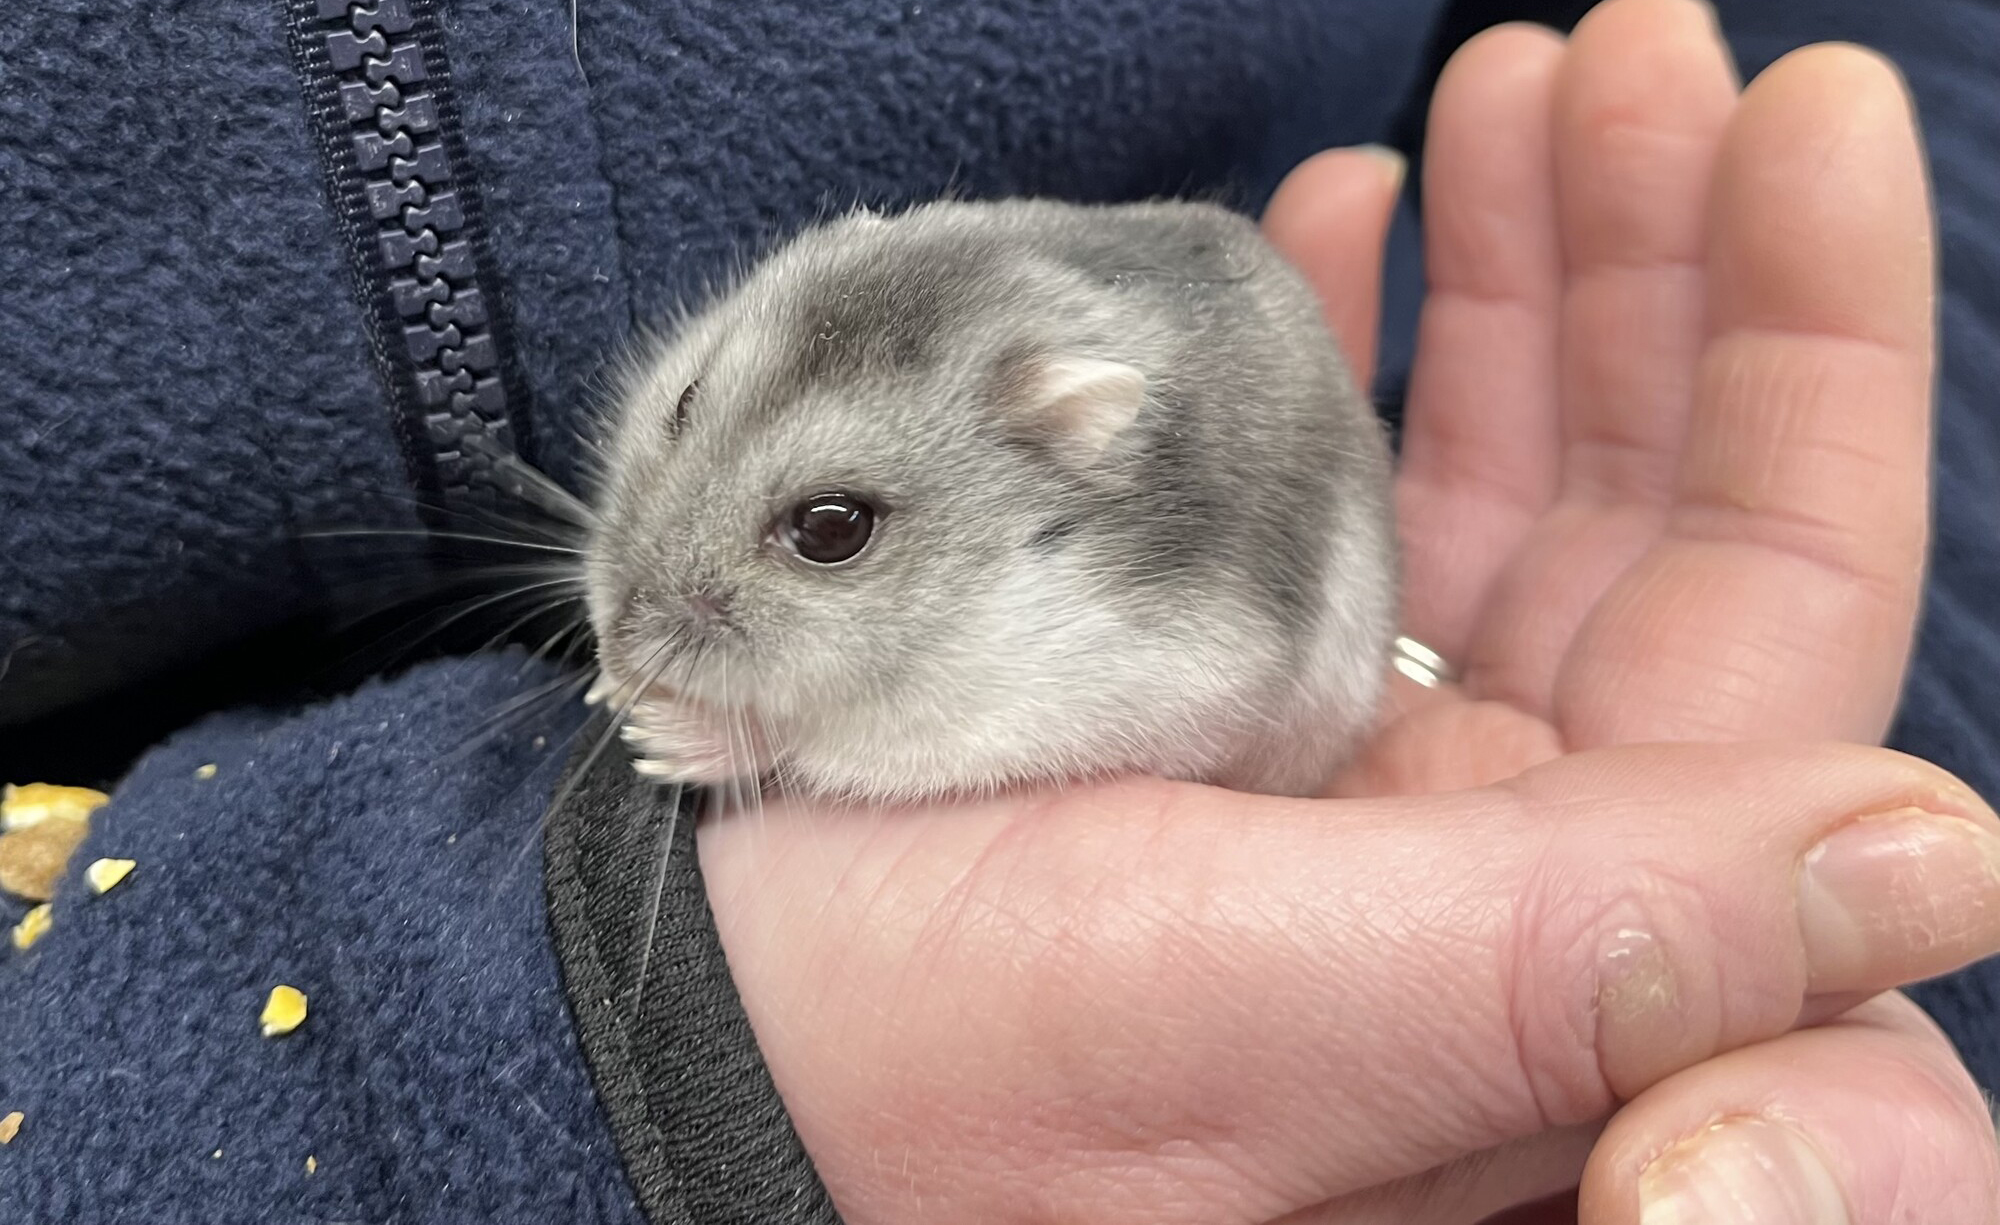 Grey hamster Roxy sits in a hand of person wearing navy jumper